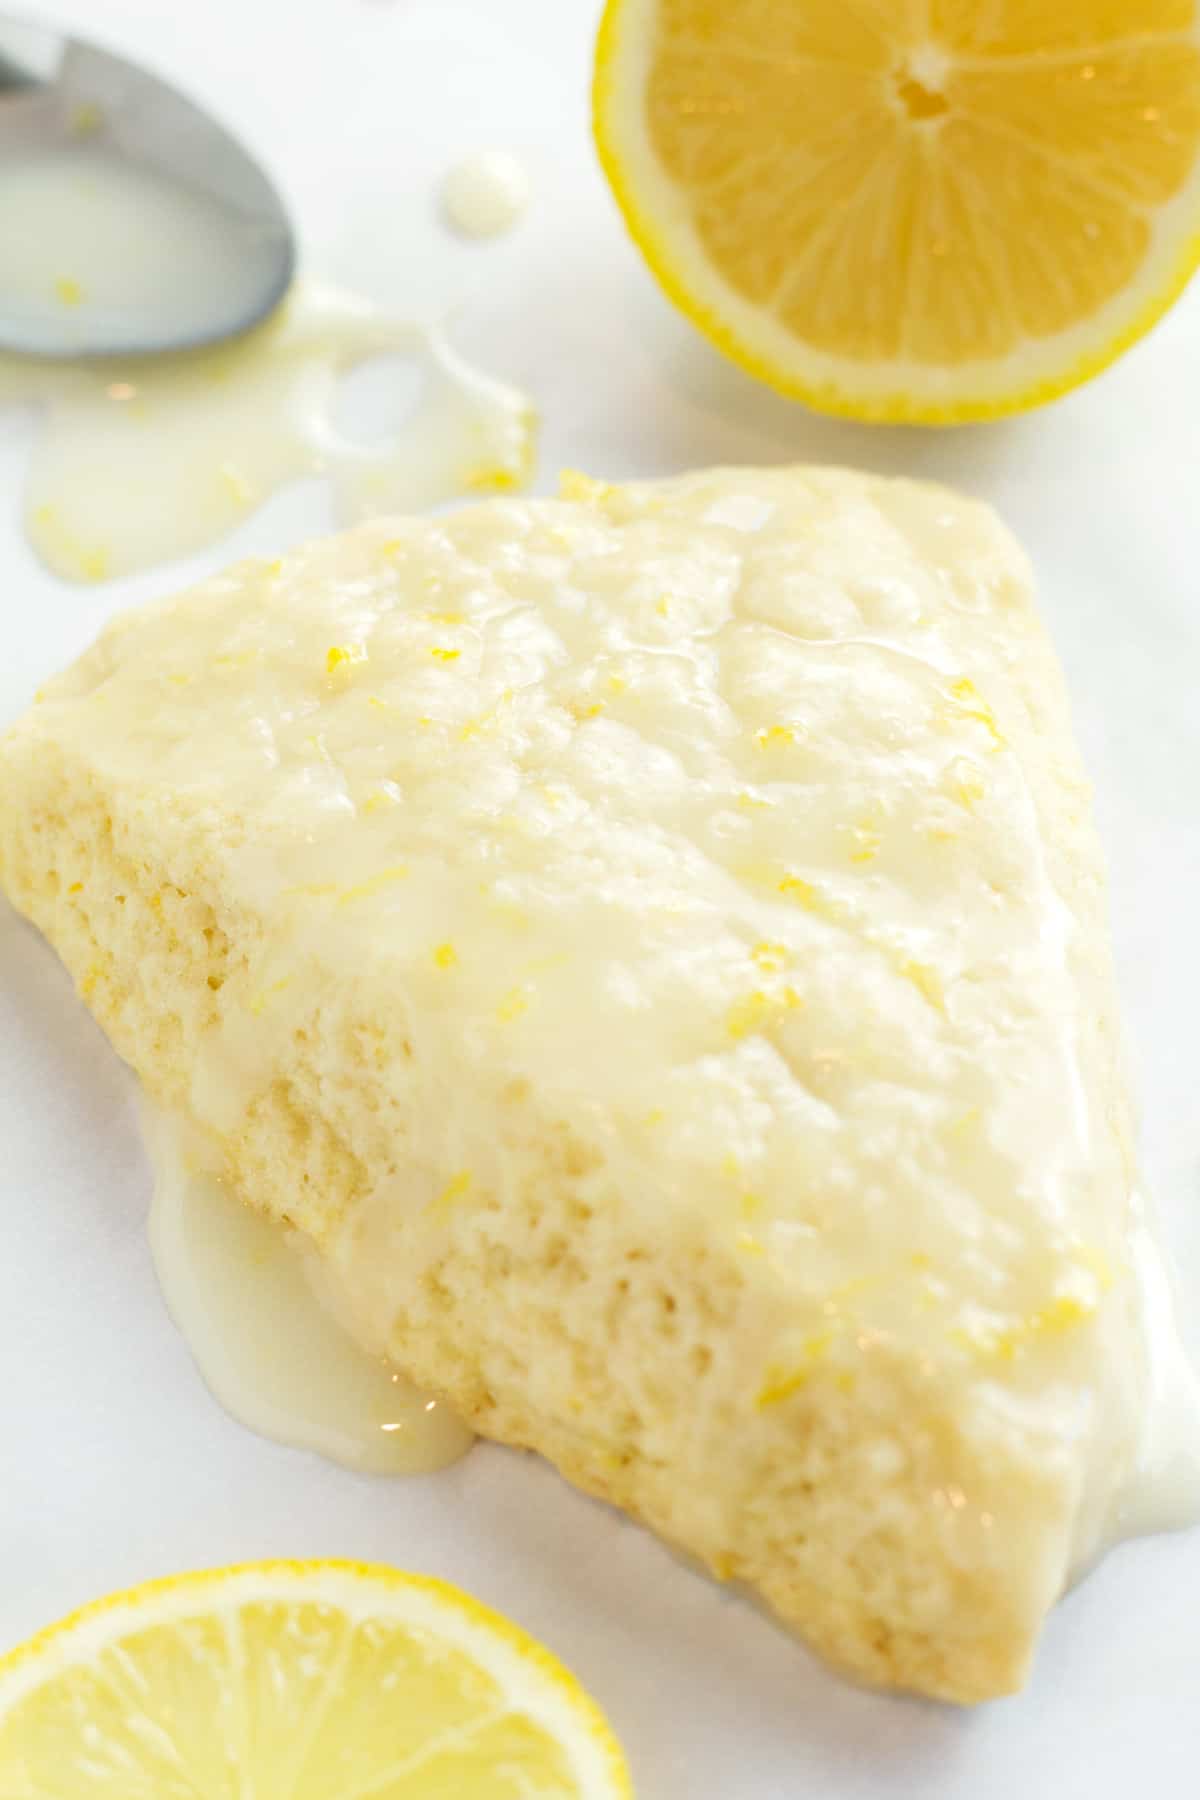 Lemon scone with lemon icing dripping around it and lemon wedges in background.